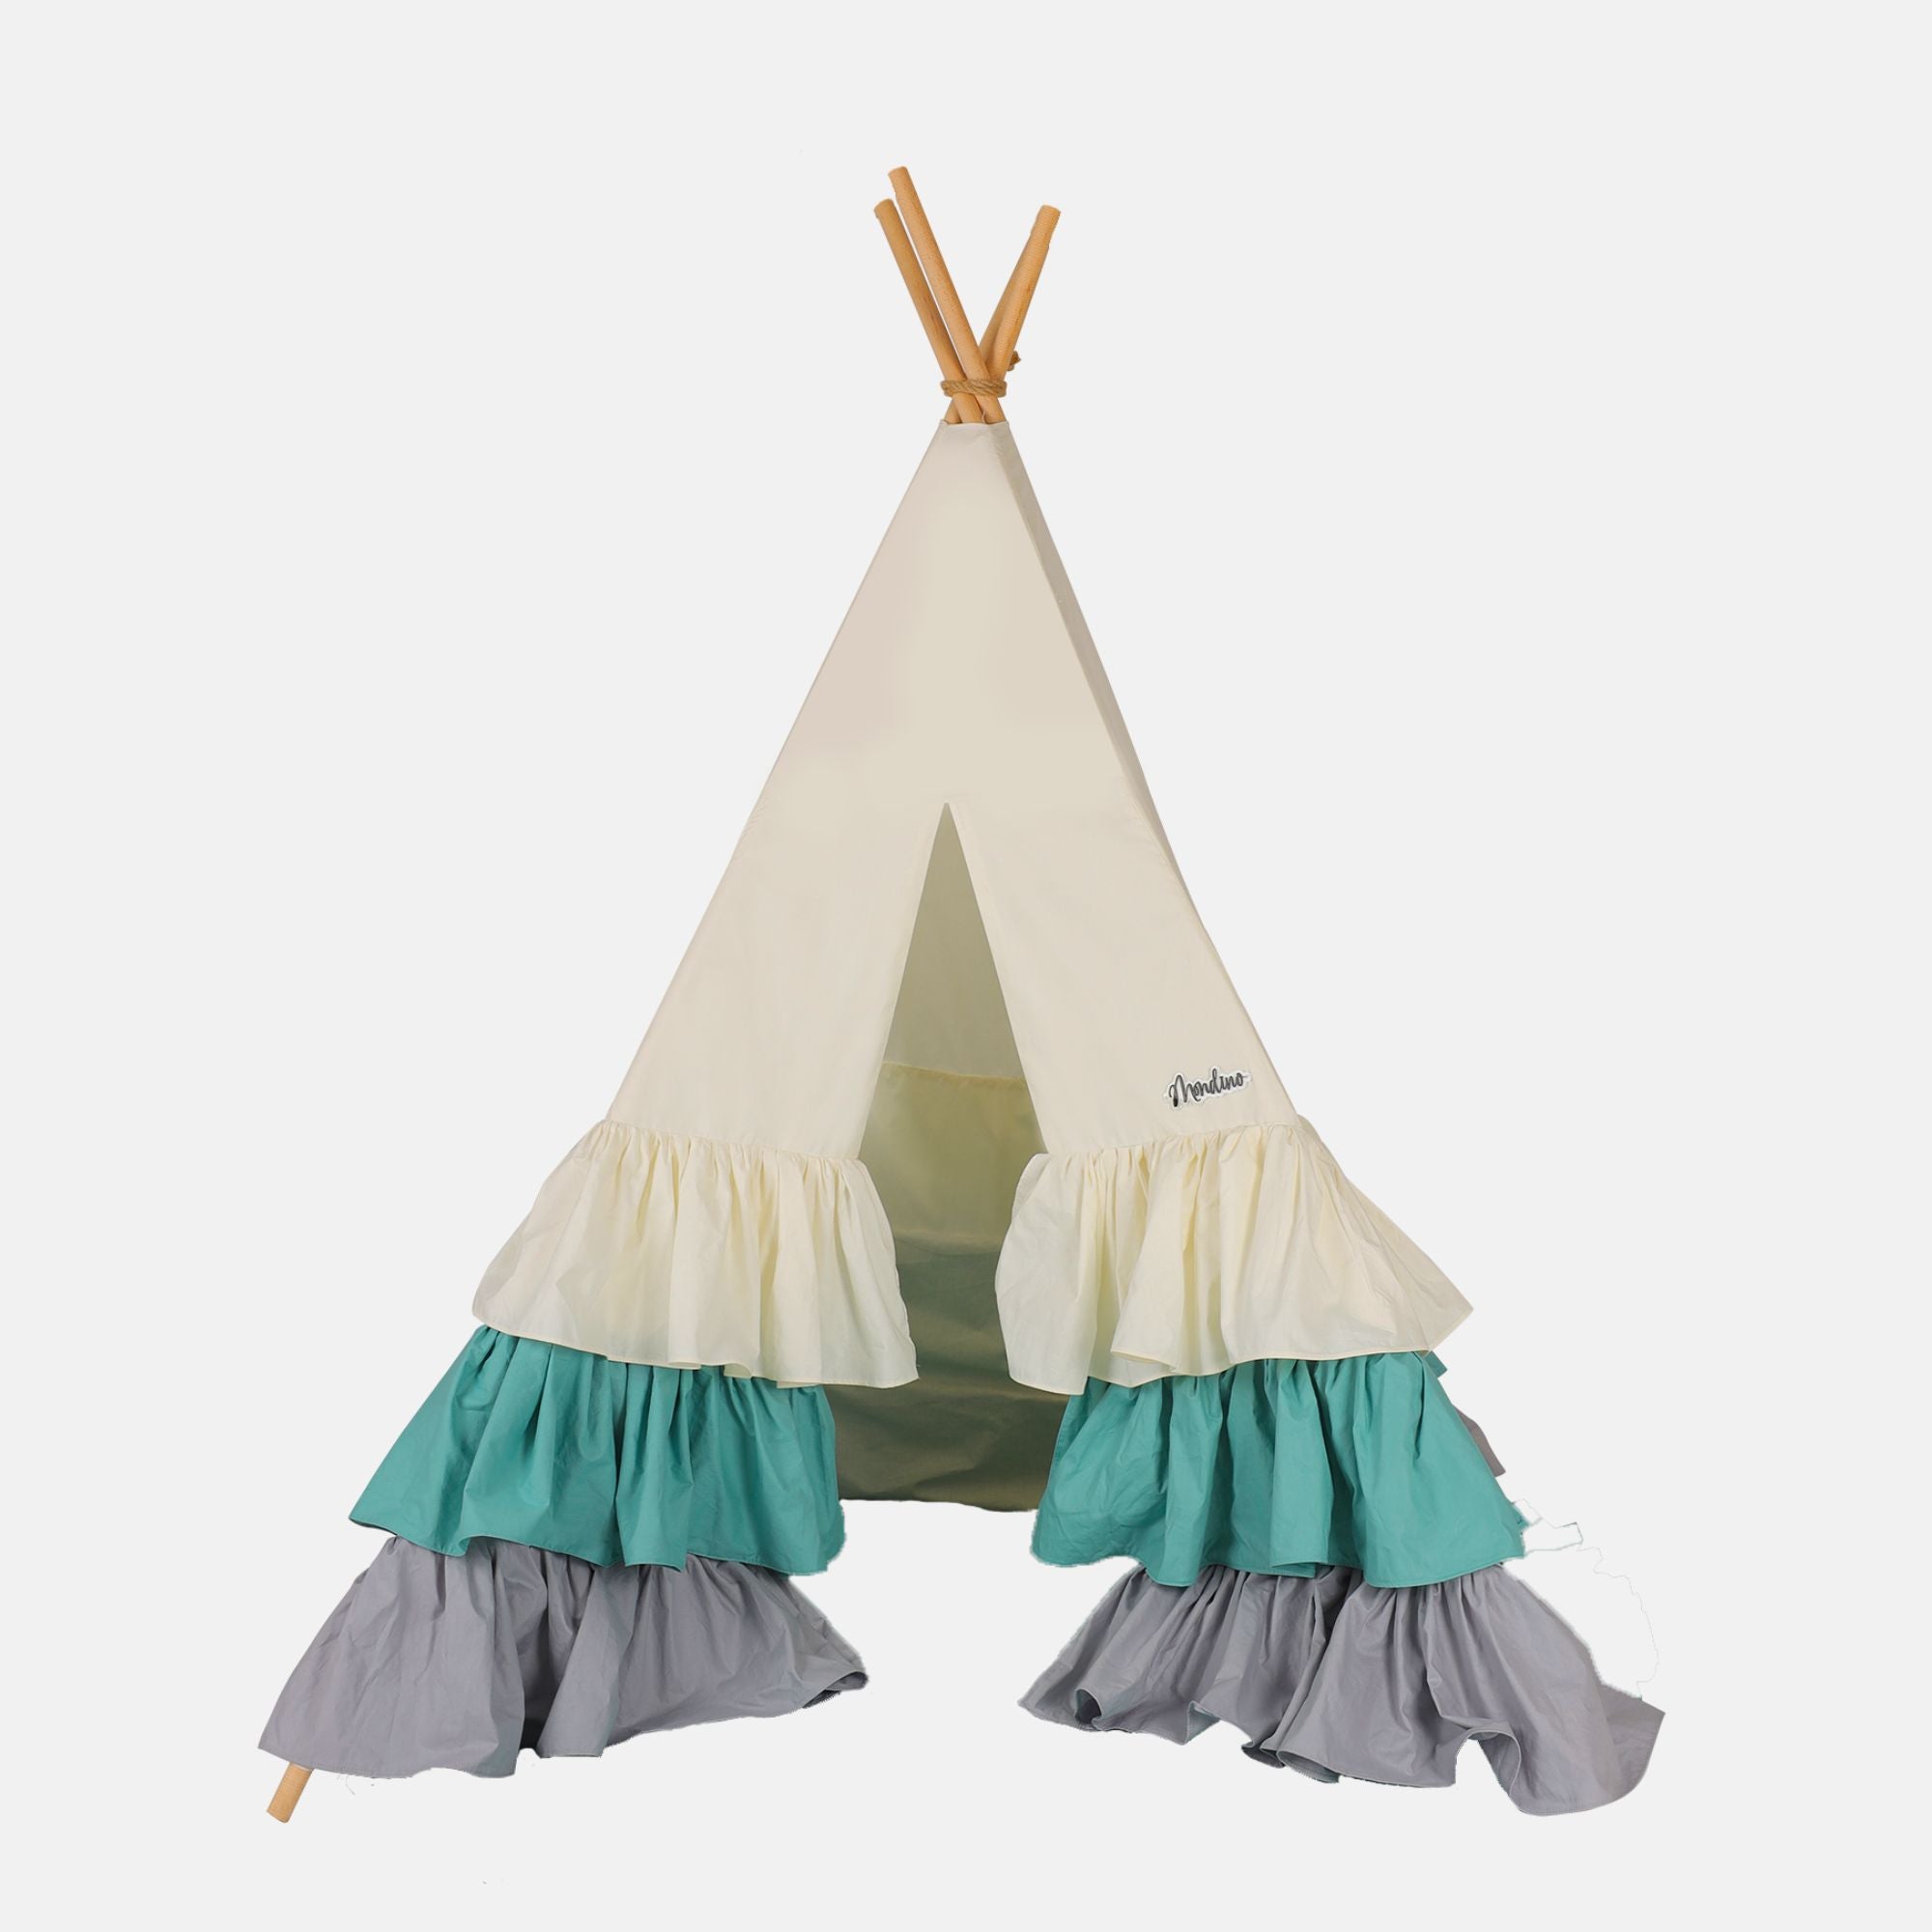 Pacific Children's Tent: Pacific Ocean Style Teepee